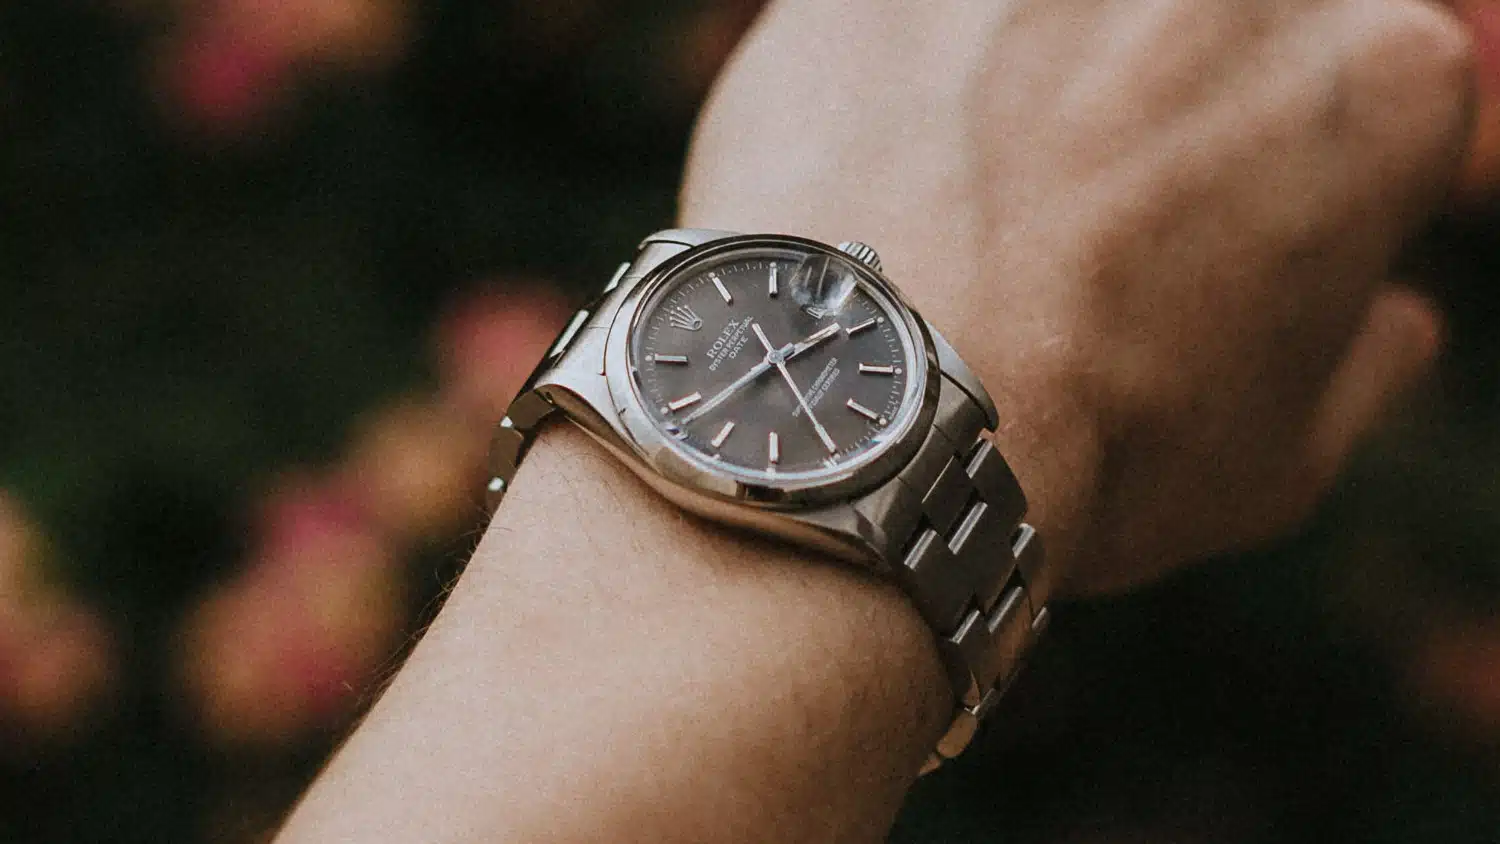 the Best Places to Buy Watches Online